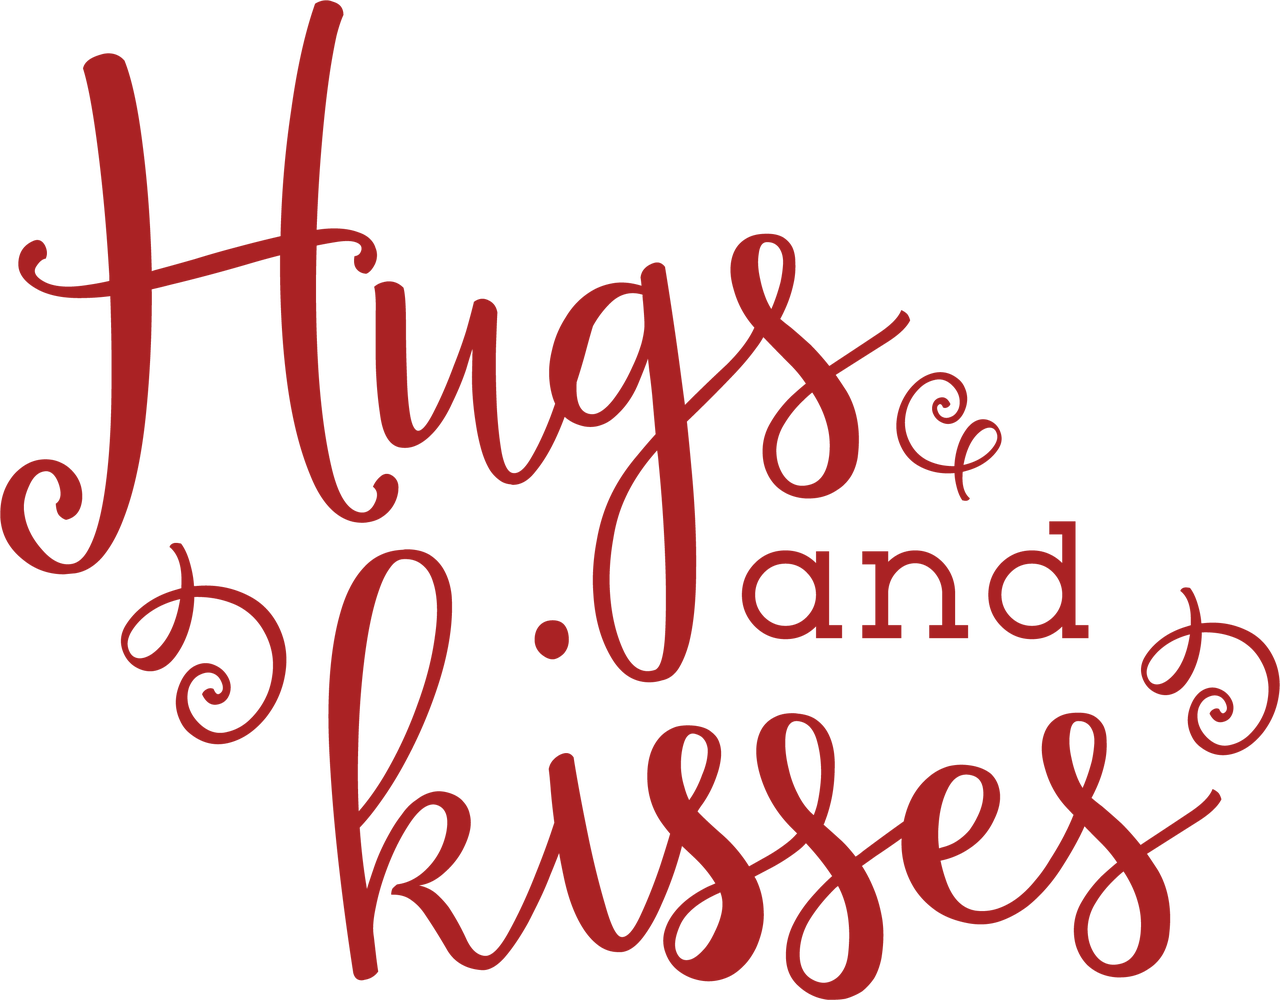 divina pereira recommends pictures of hugs and kisses pic